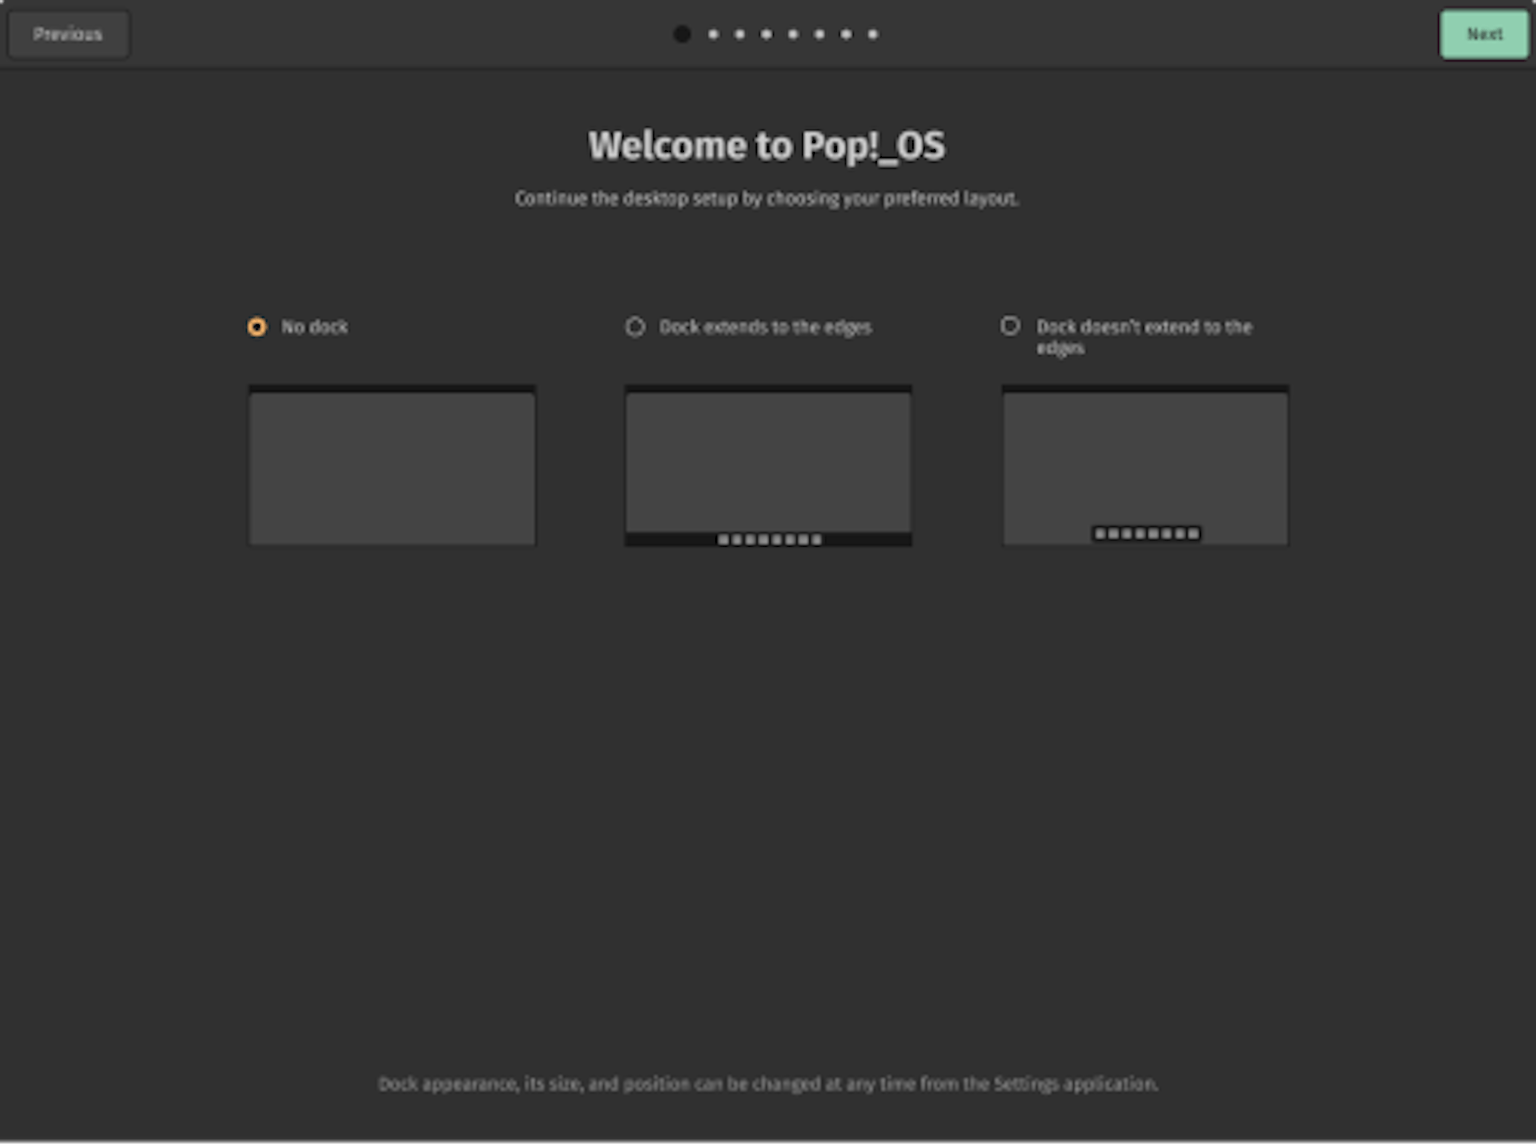 Welcome to Pop!_OS onboarding screen